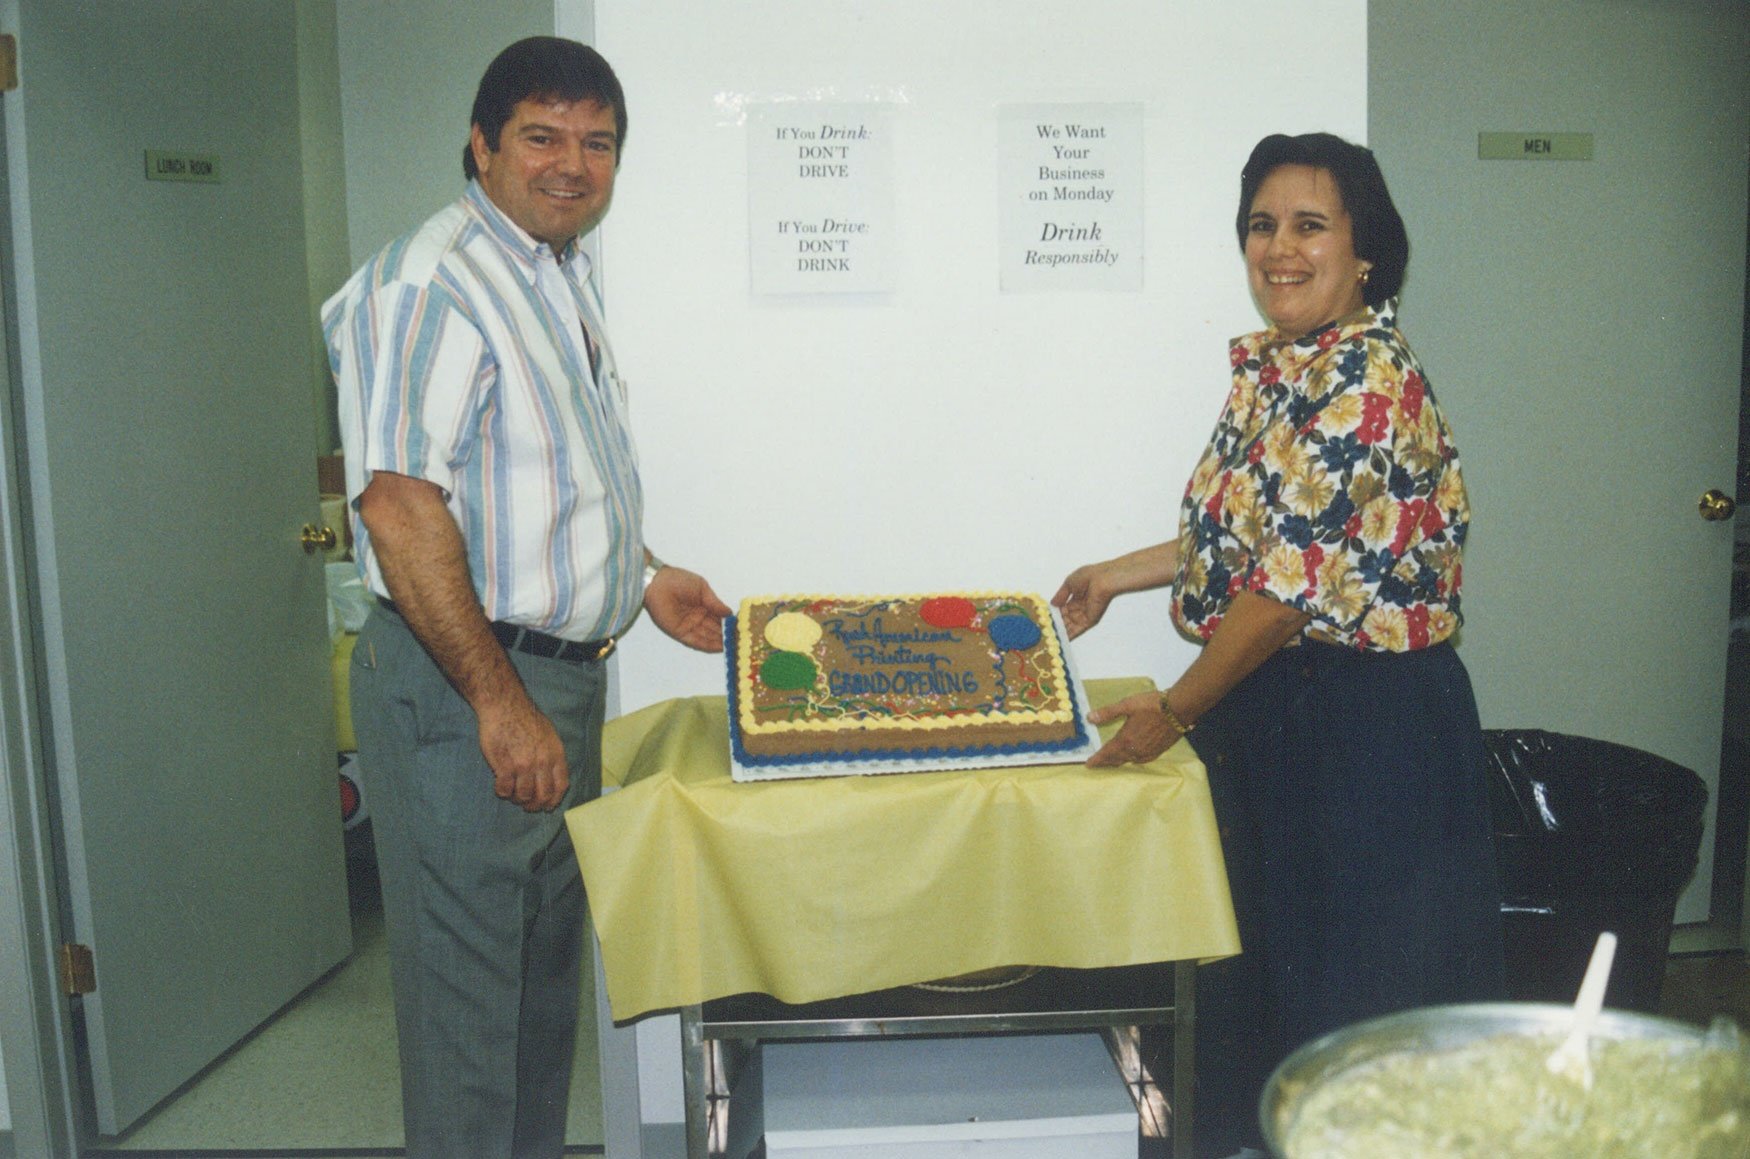 Grand Opening of New Location 1991